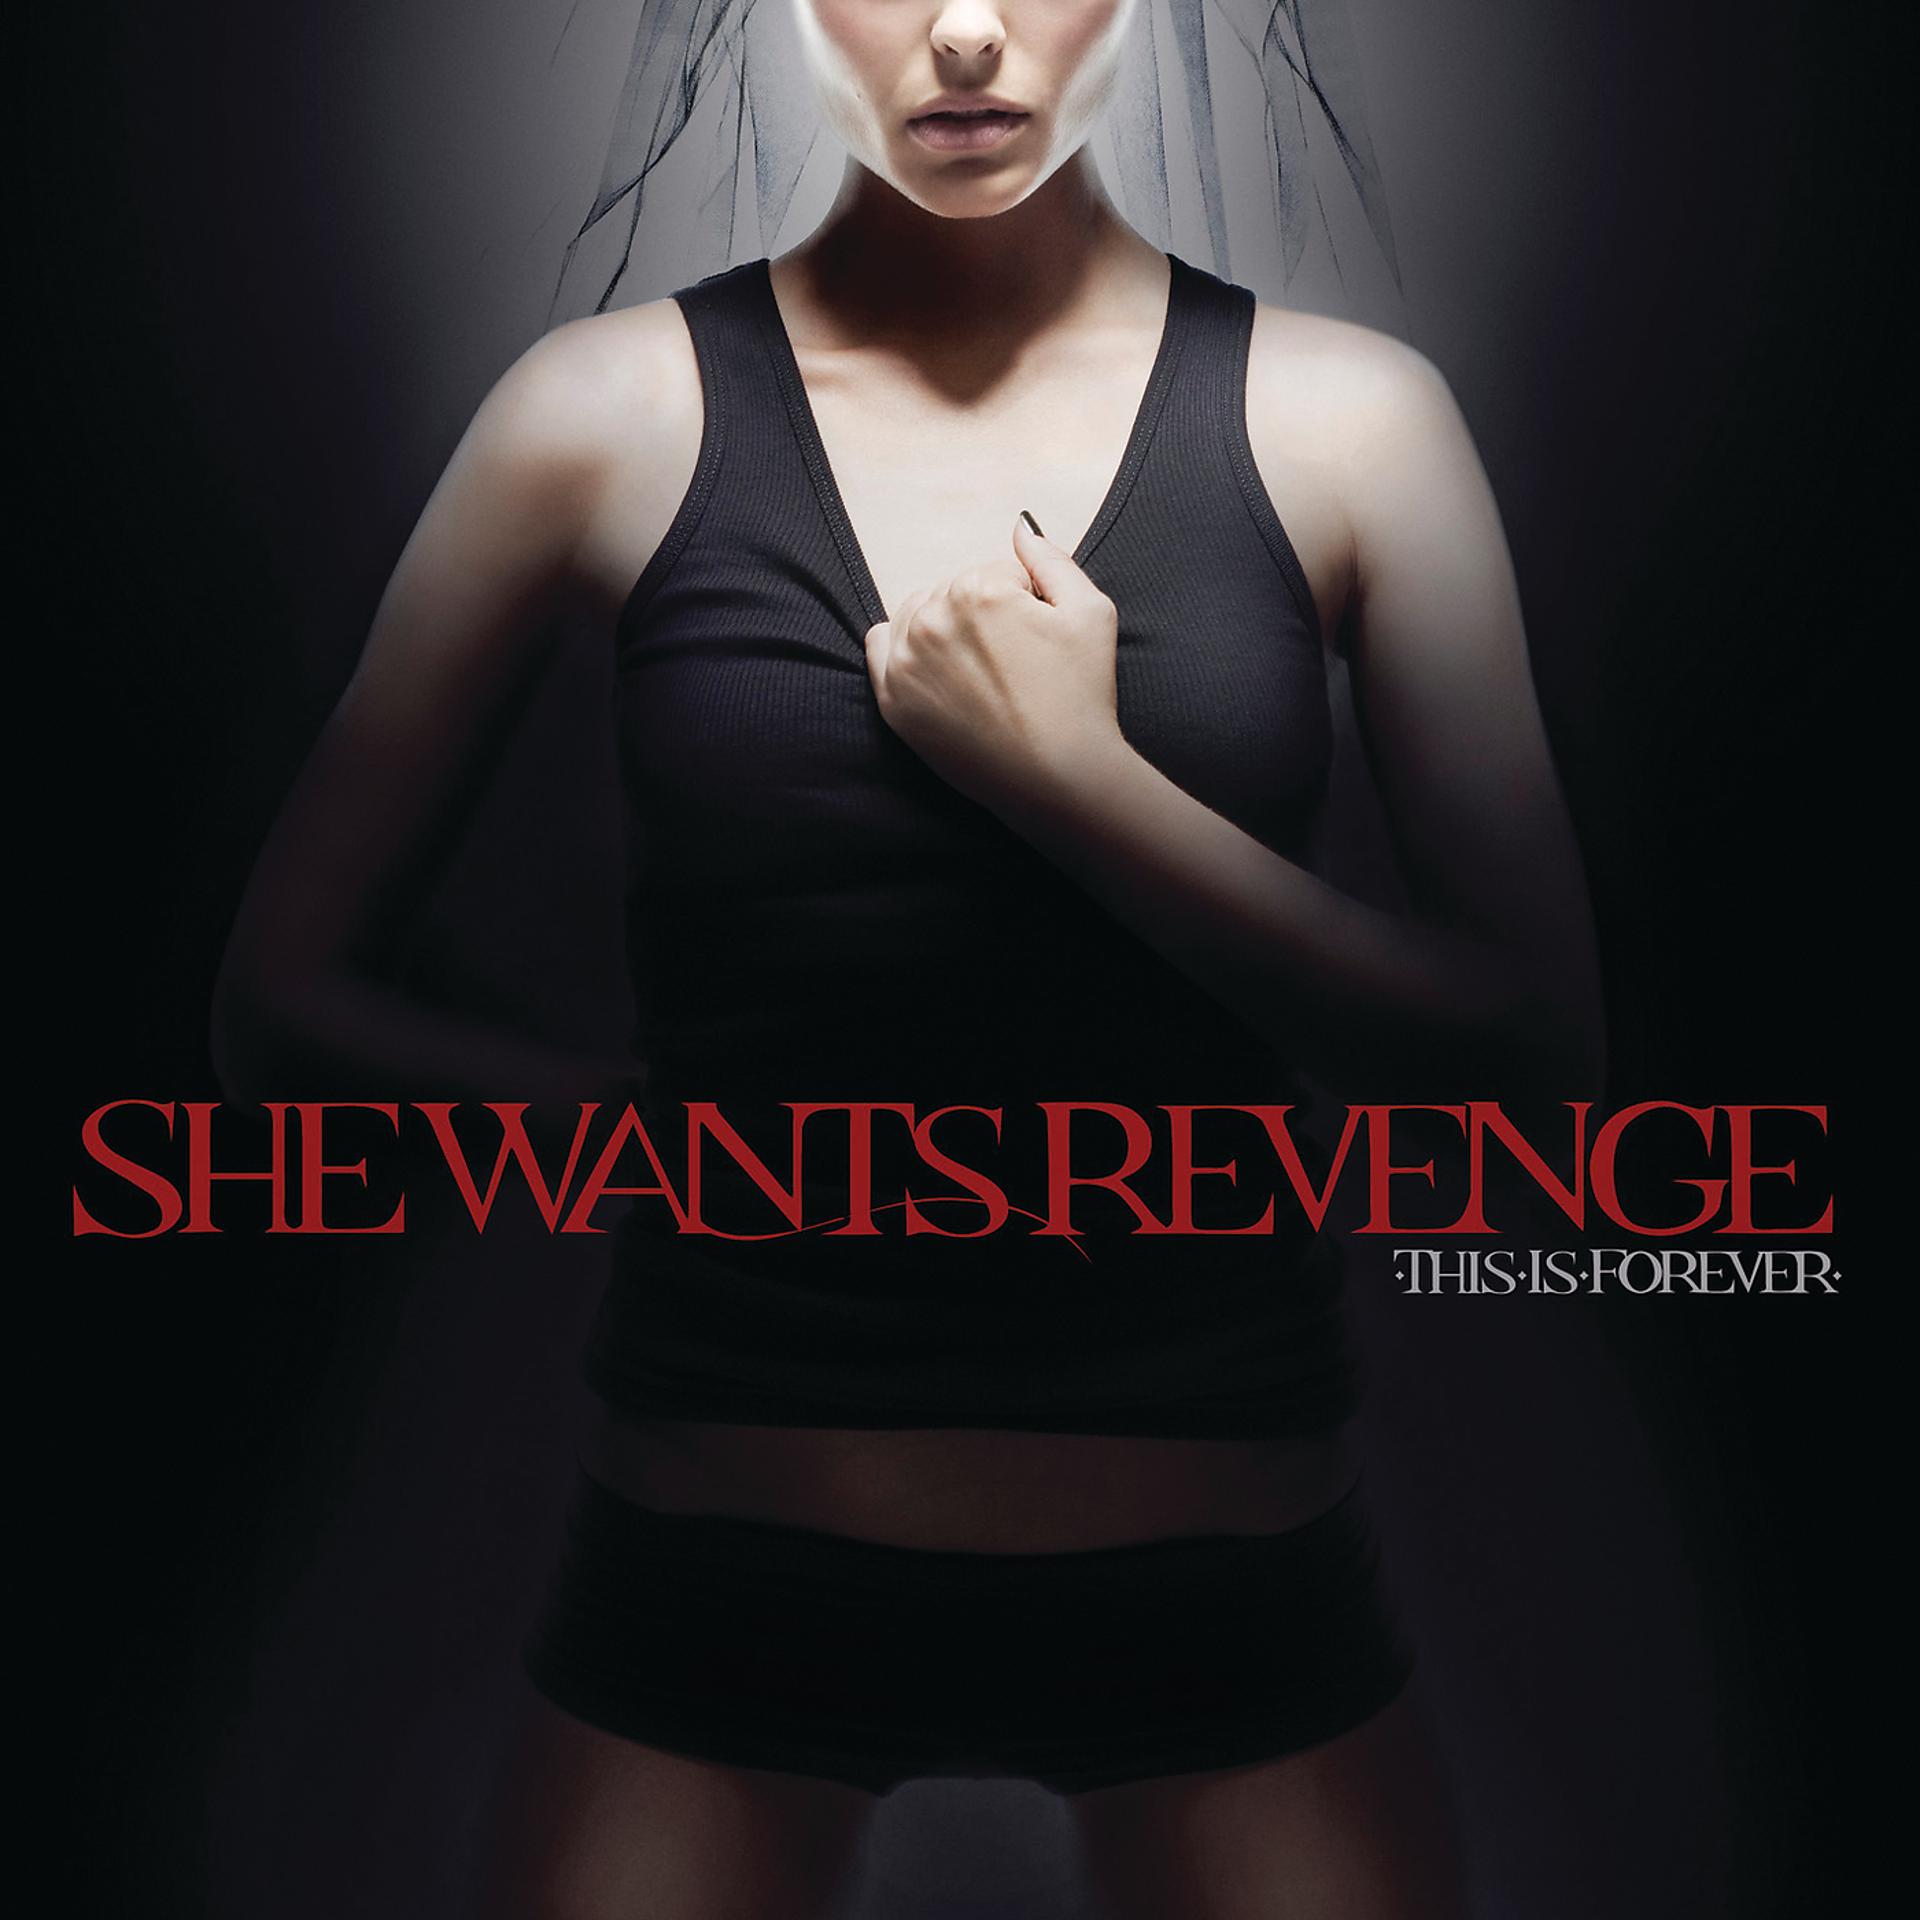 She wants Revenge. She wants Revenge album. She wants Revenge this is Forever. Альбом обложка she wants Revenge. Anything she wants